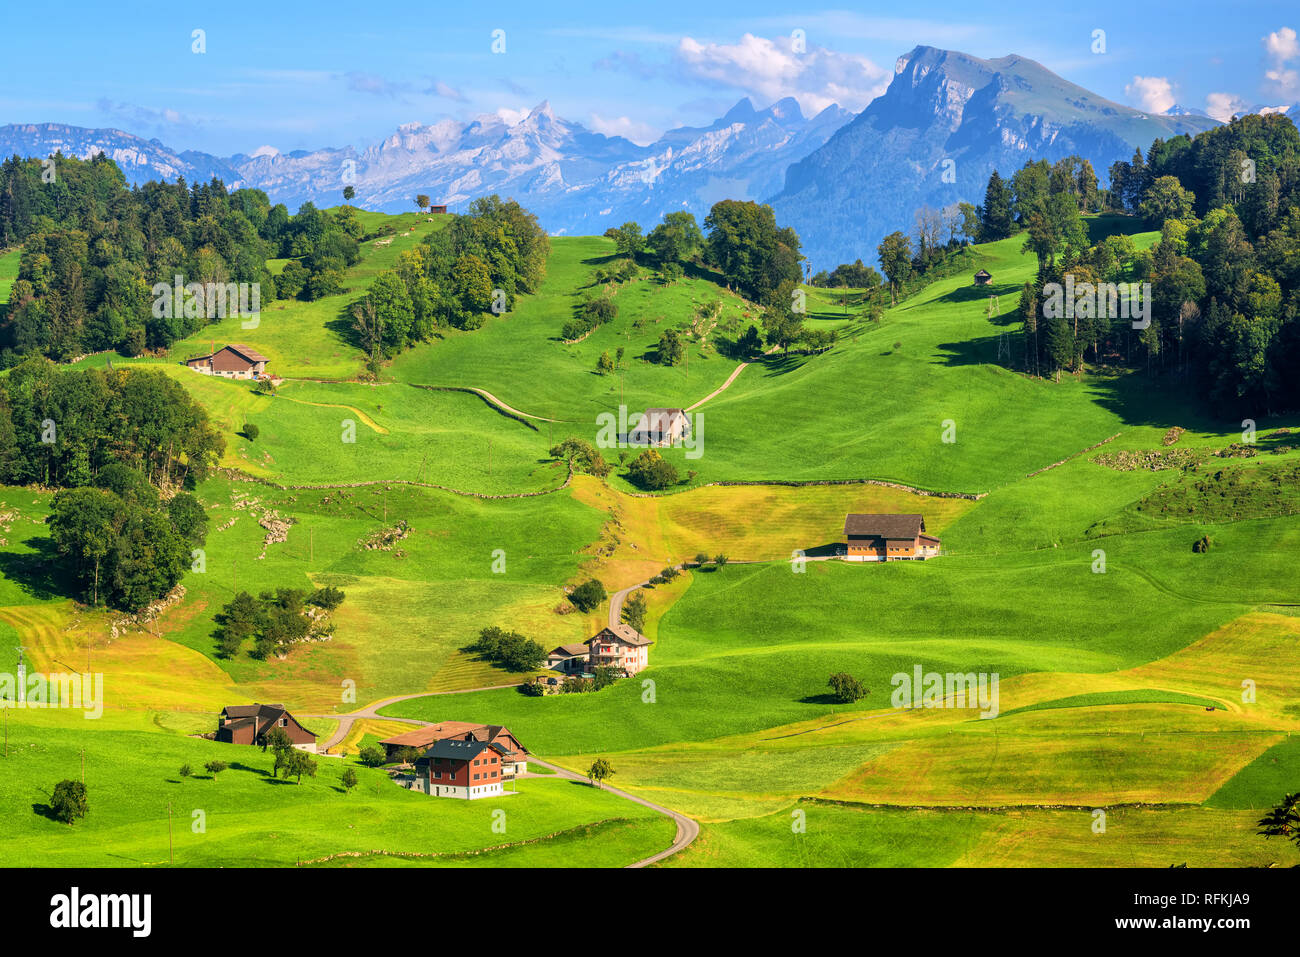 Idyllic Swiss Rural Landscape With Green Meadows And Alps Mountain